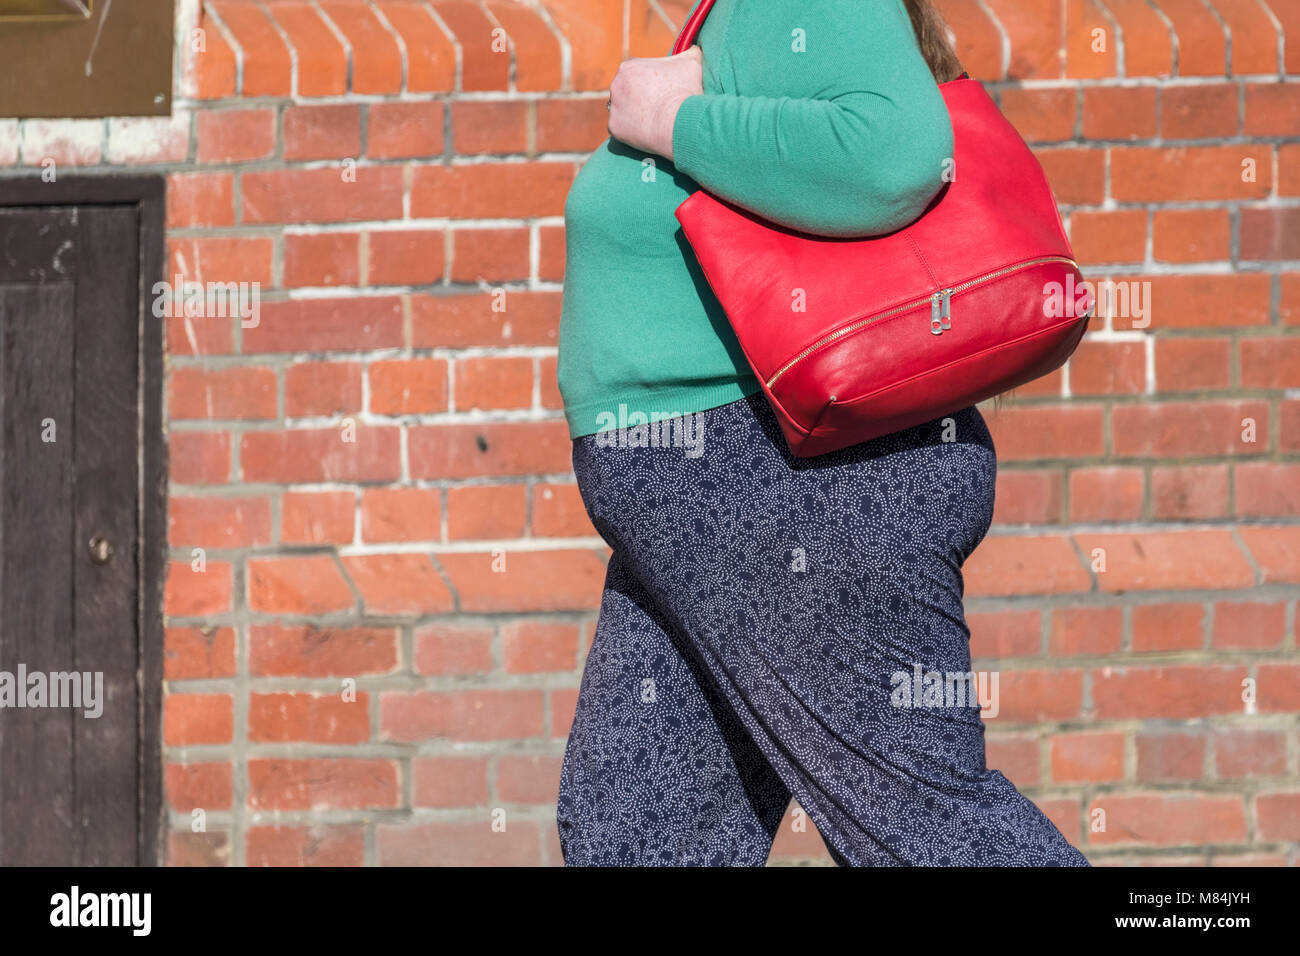 Large obese woman carrying handbag walking, side profile view, in the UK. Obesity crisis. Obese women. Stock Photo